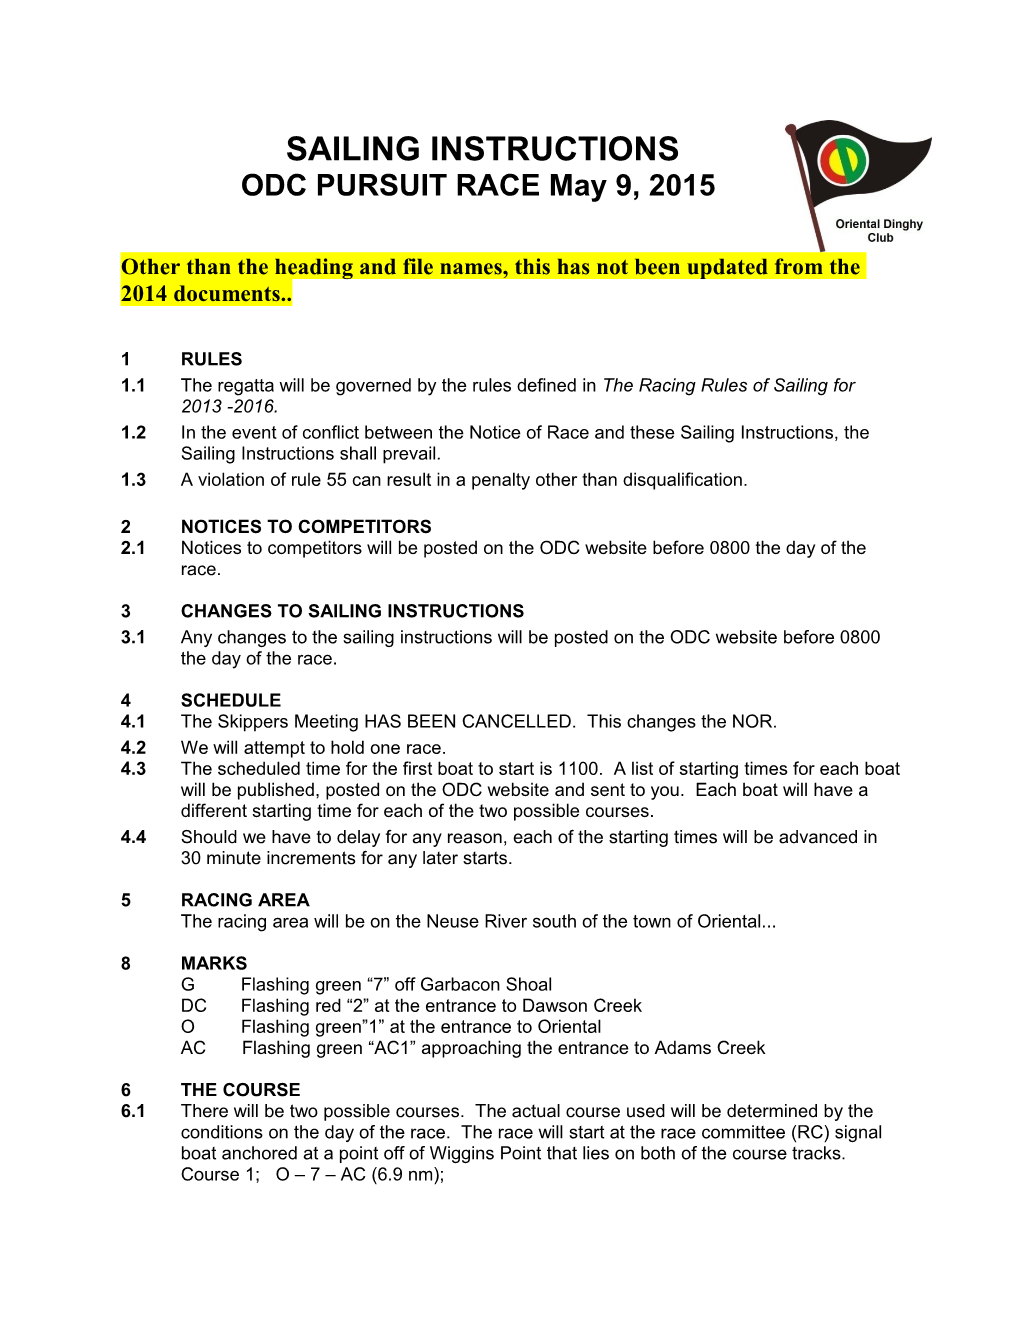 ODC PURSUIT RACE May 9, 2015